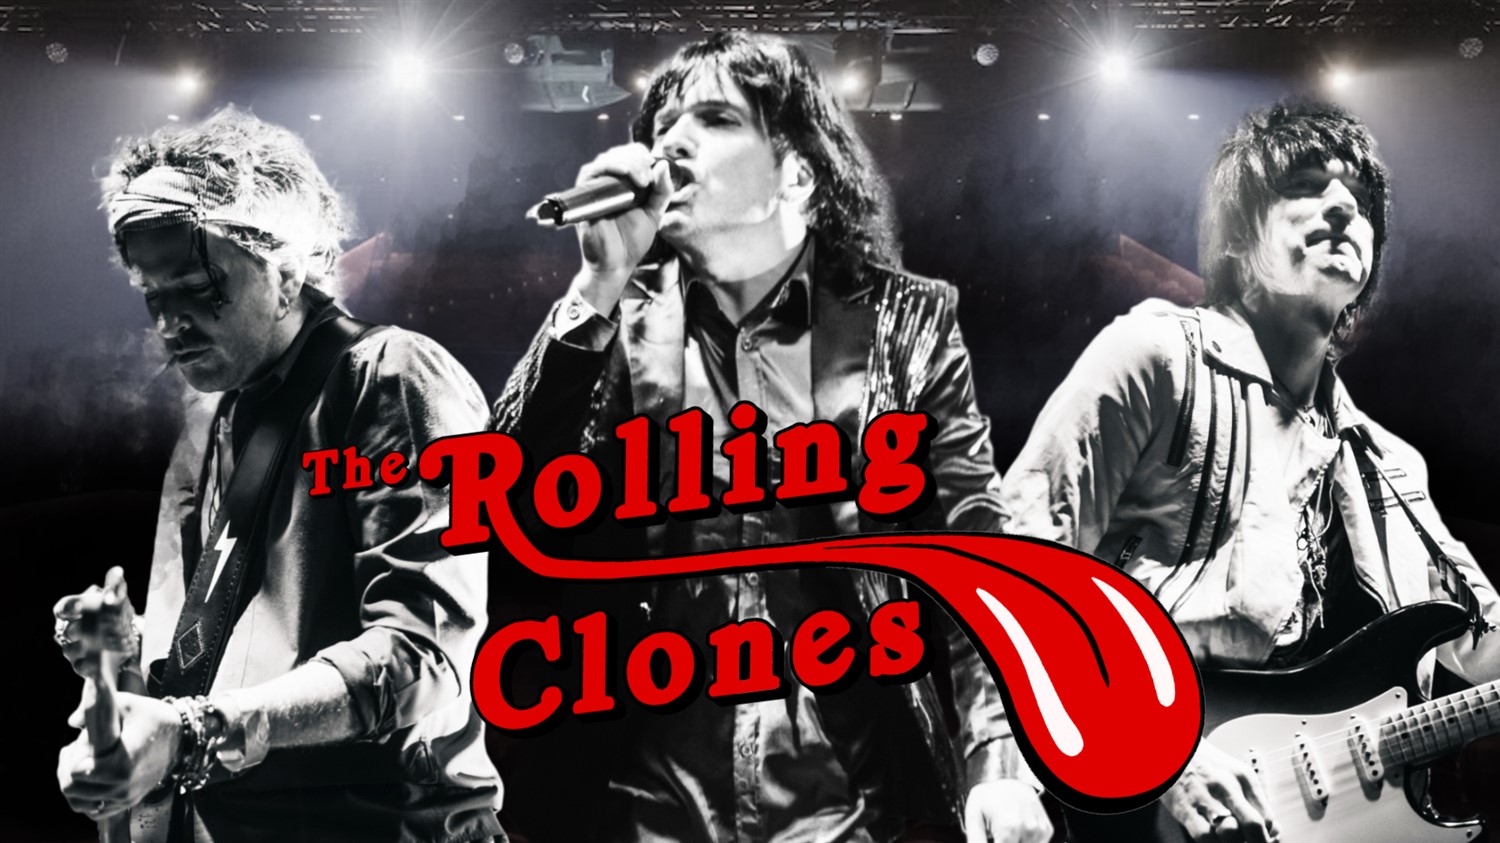 The Rolling Clones After Party and DJ on Jun 21, 19:30@Standard capacity - Pick a seat, Buy tickets and Get information on Sutton Coldfield Town Hall 